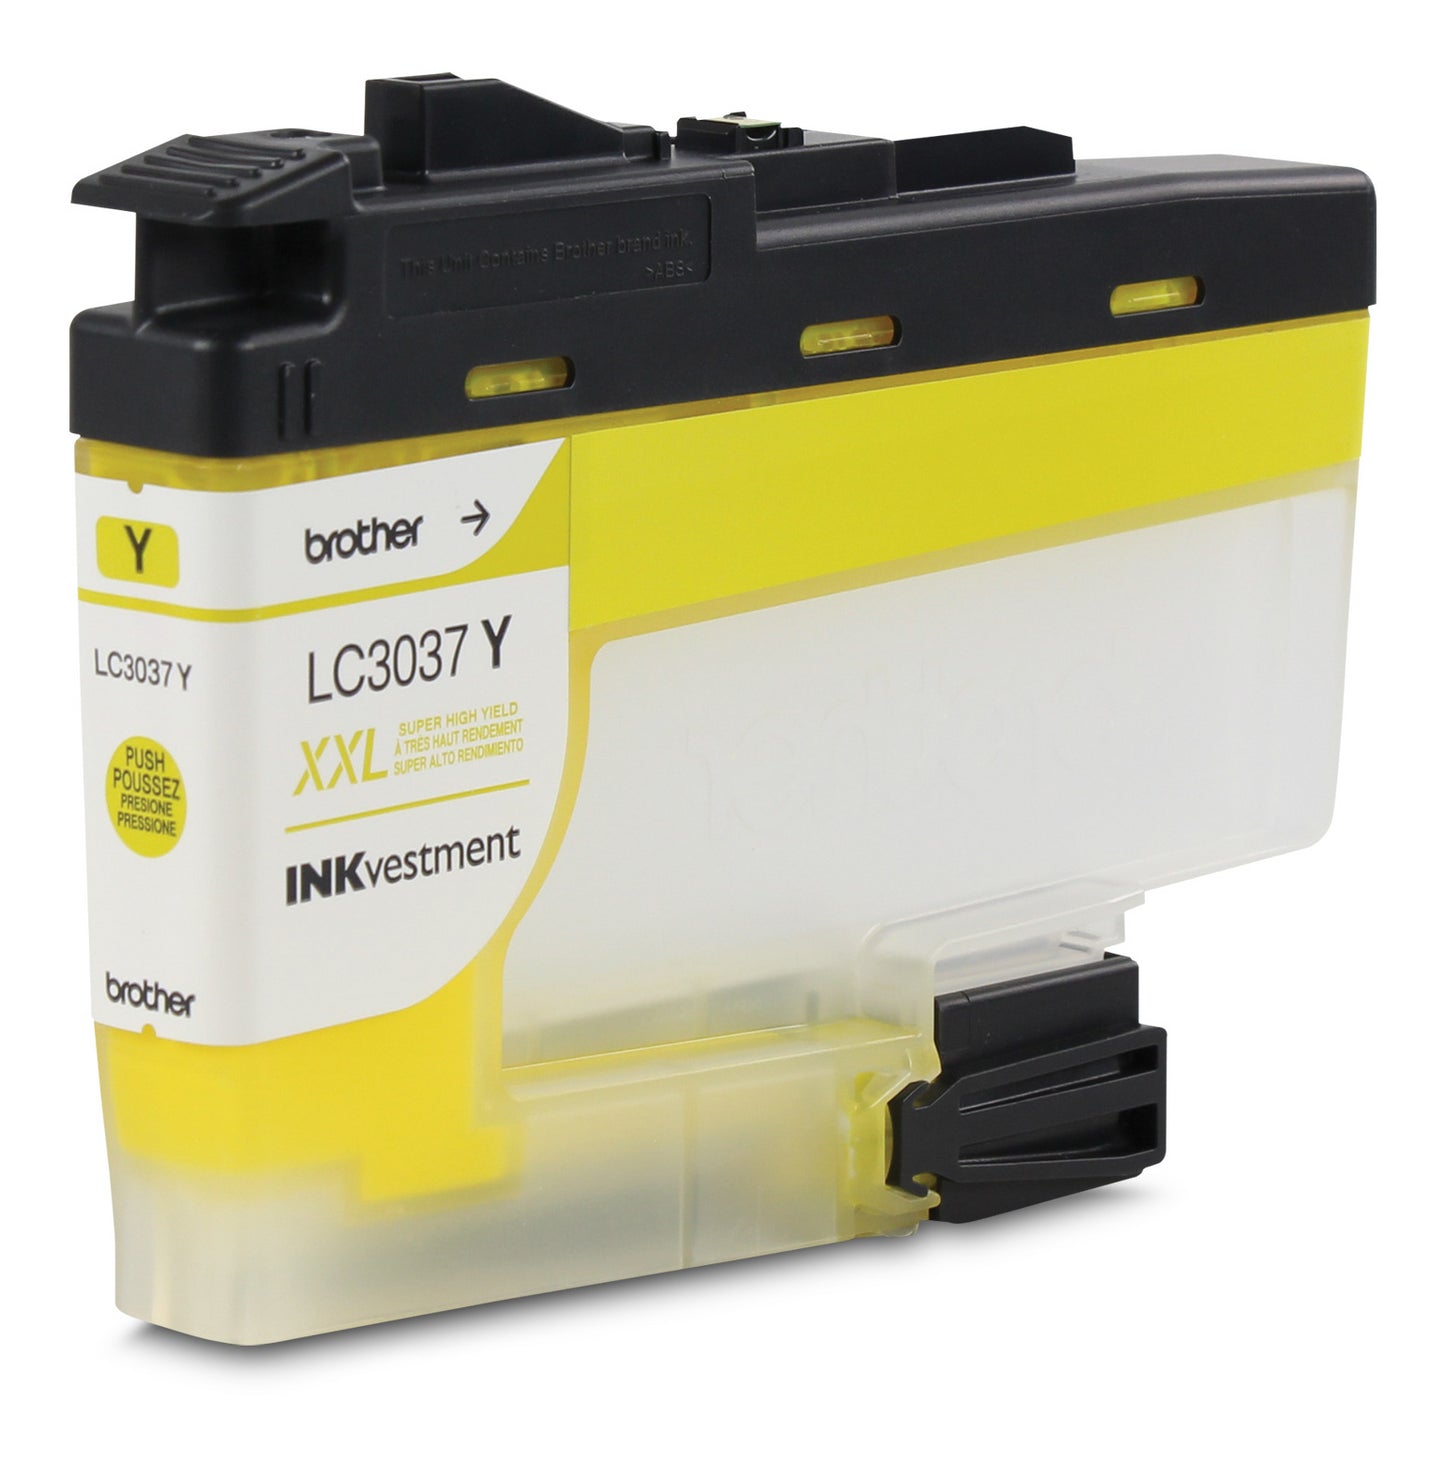 LC3037YS Brother Yellow Super High Yield Inkvestment Cartridge